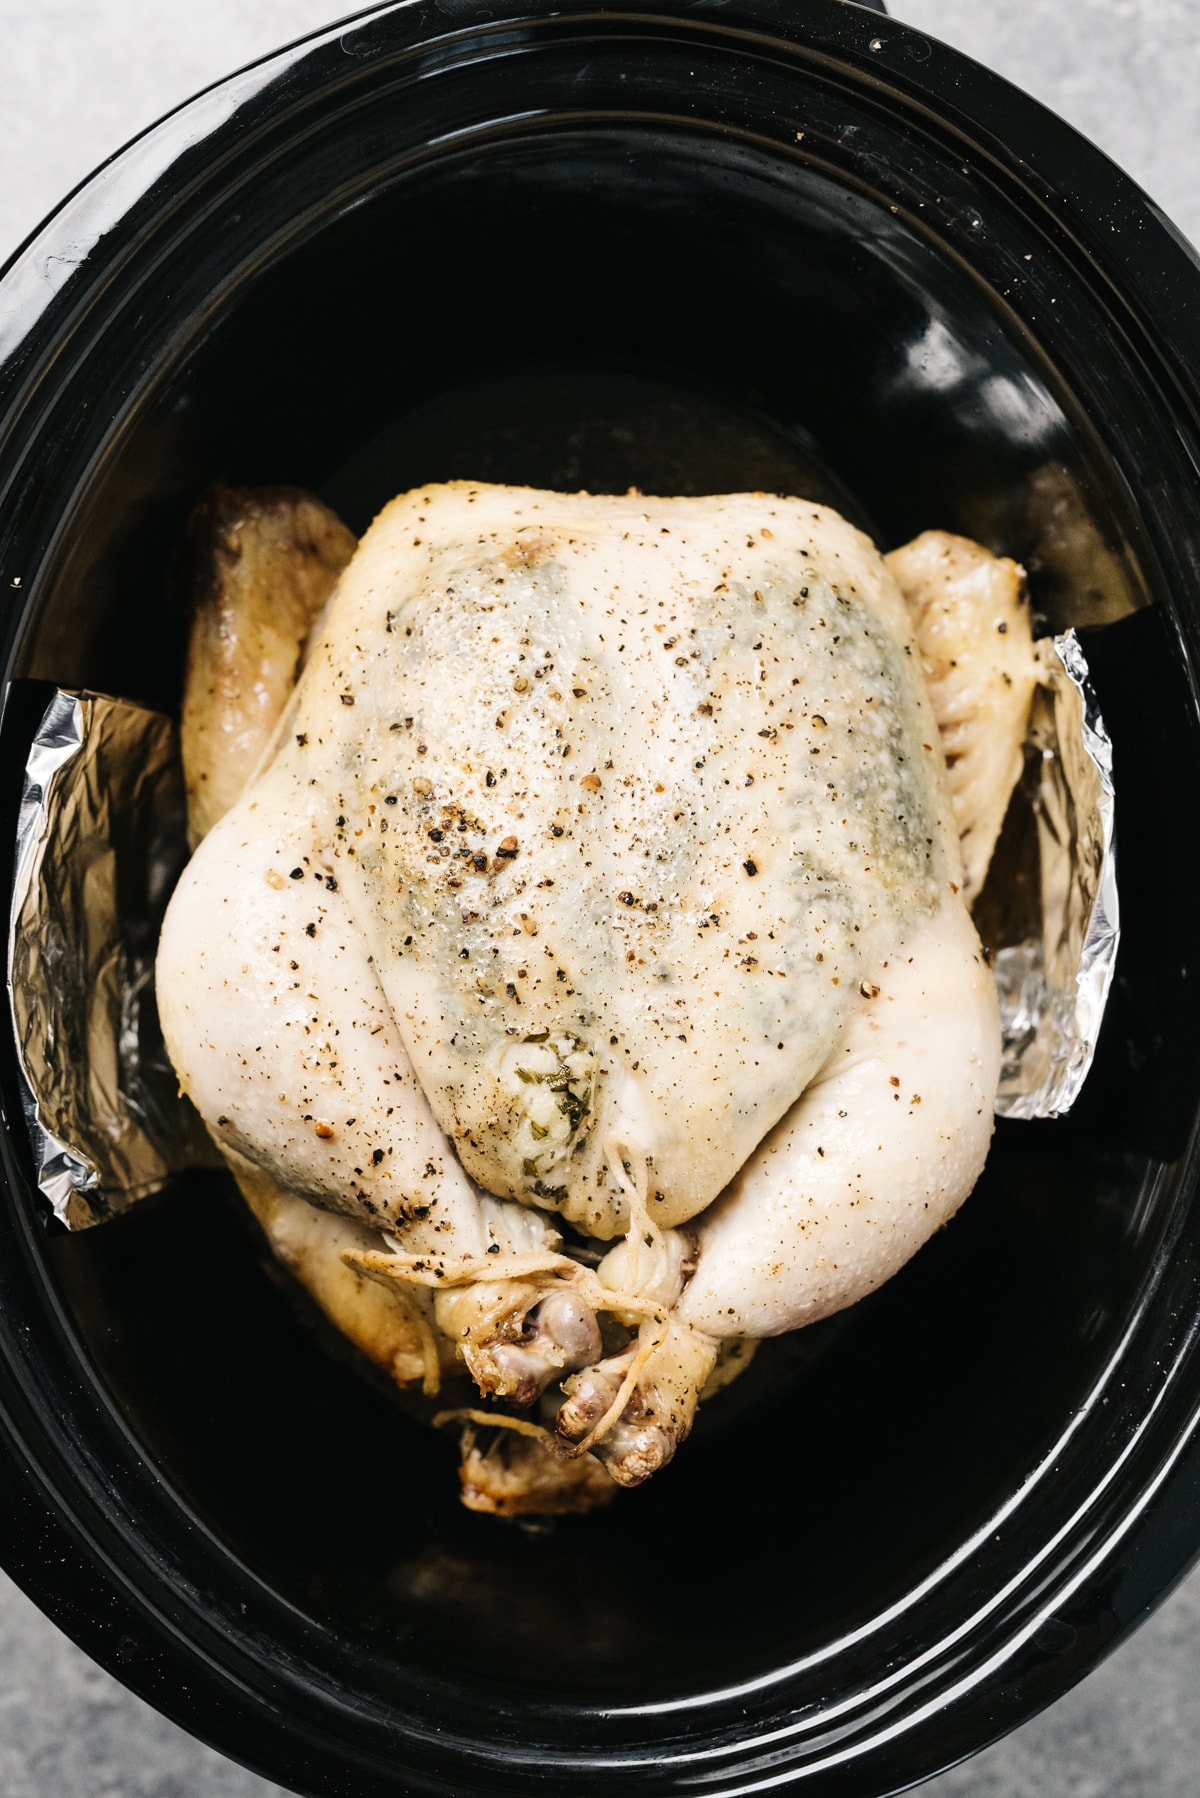 A whole chicken trussed with twine with a garlic butter rub in a slow cooker.